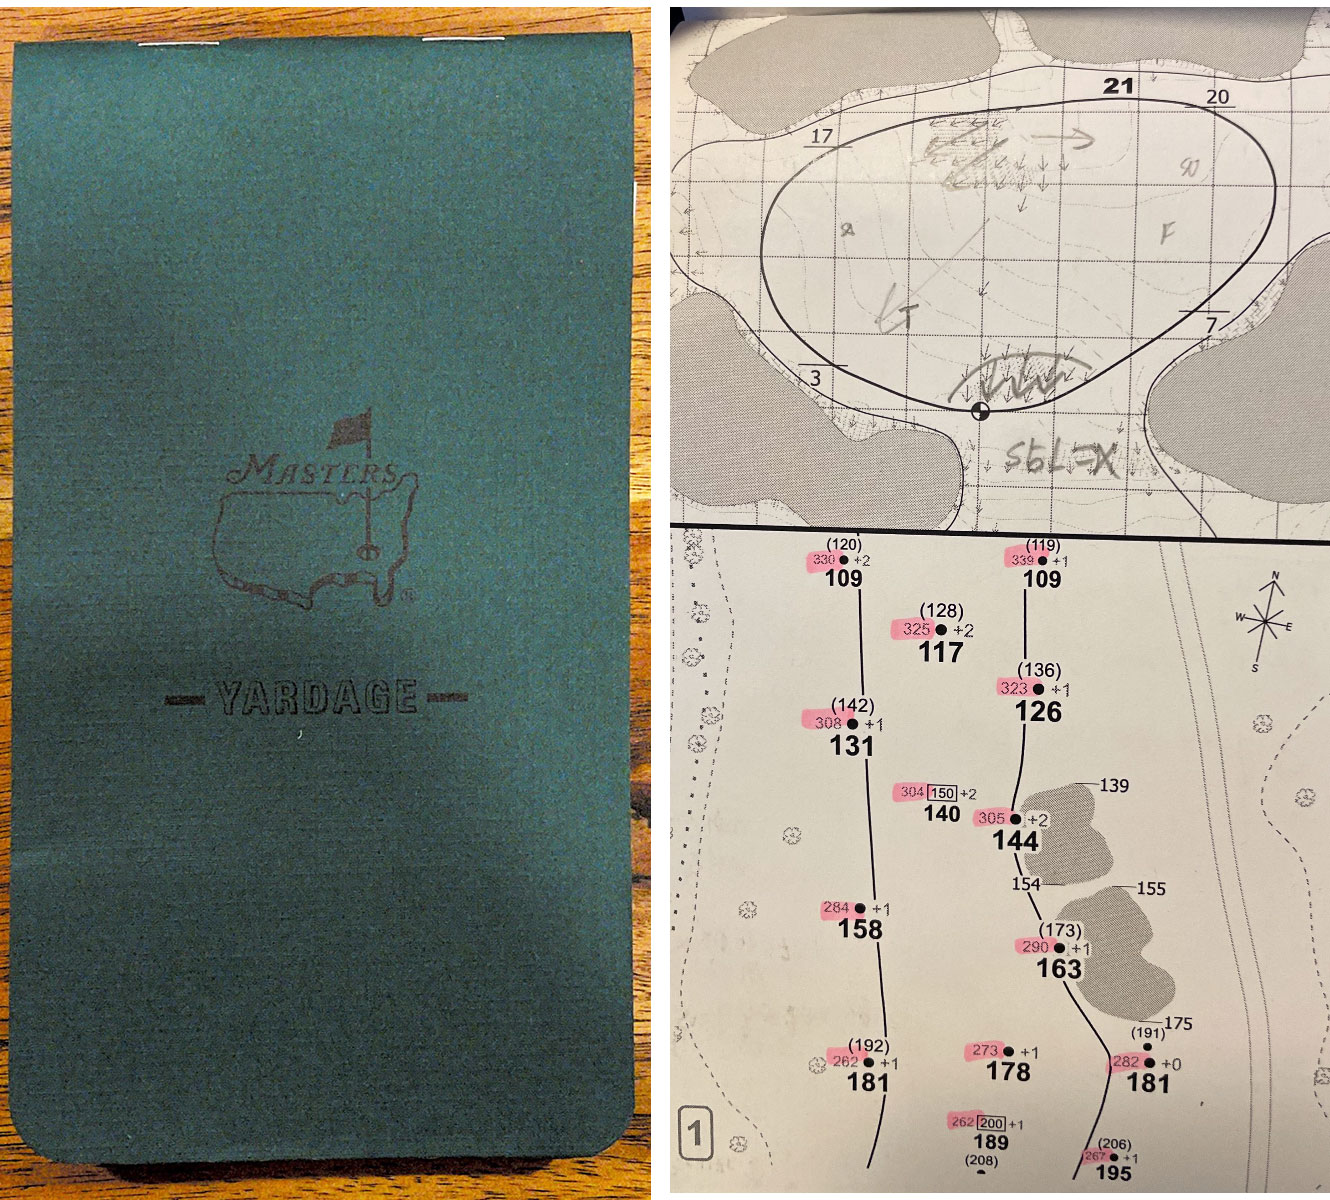 Masters 21 Collin Morikawa S Yardage Book Reveals The Work Pros Put In To Prep For Augusta National Golf News And Tour Information Golfdigest Com